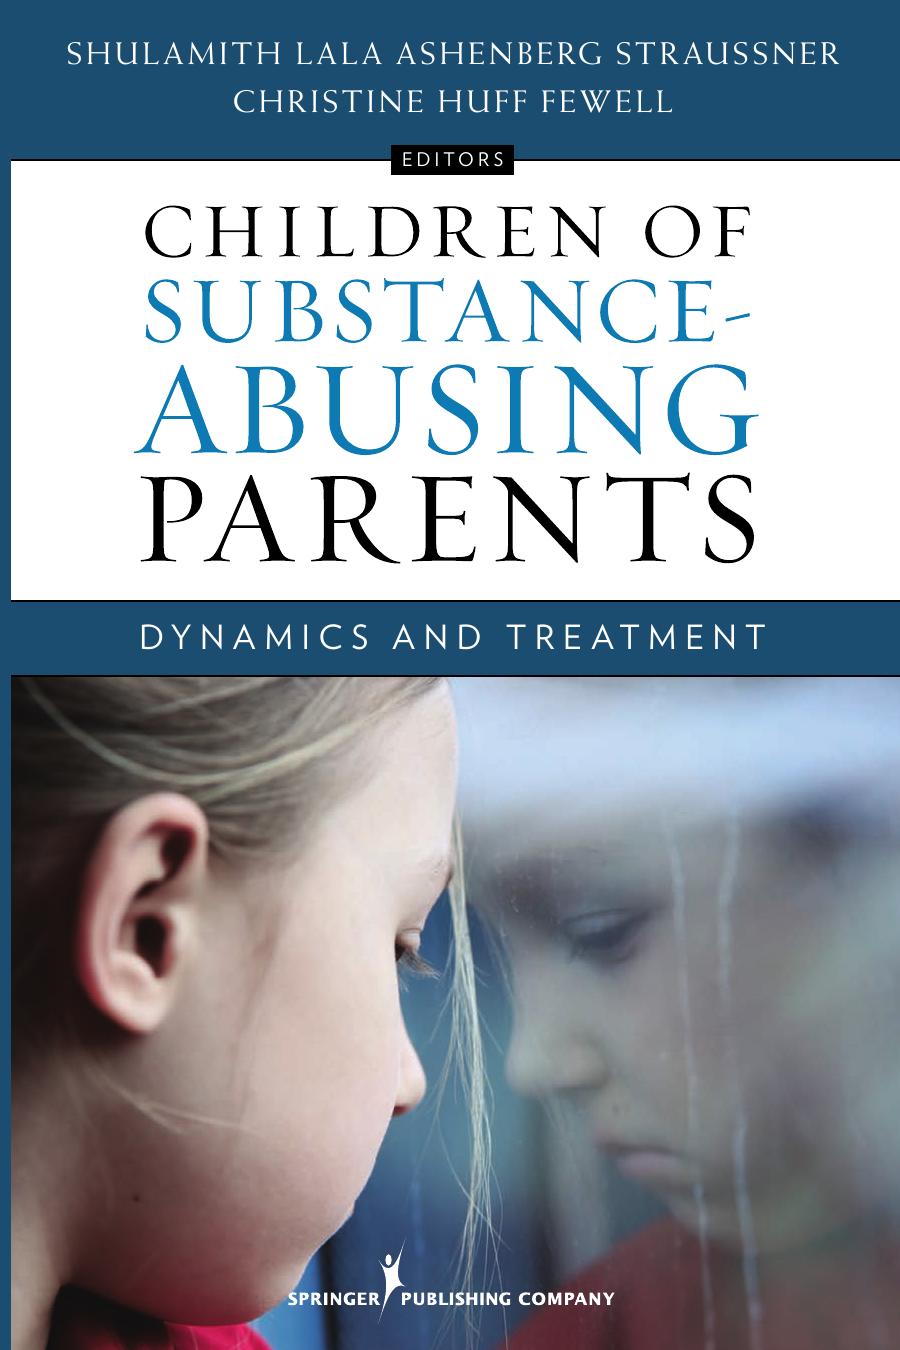 Children of Substance-Abusing Parents: Dynamics and Treatment